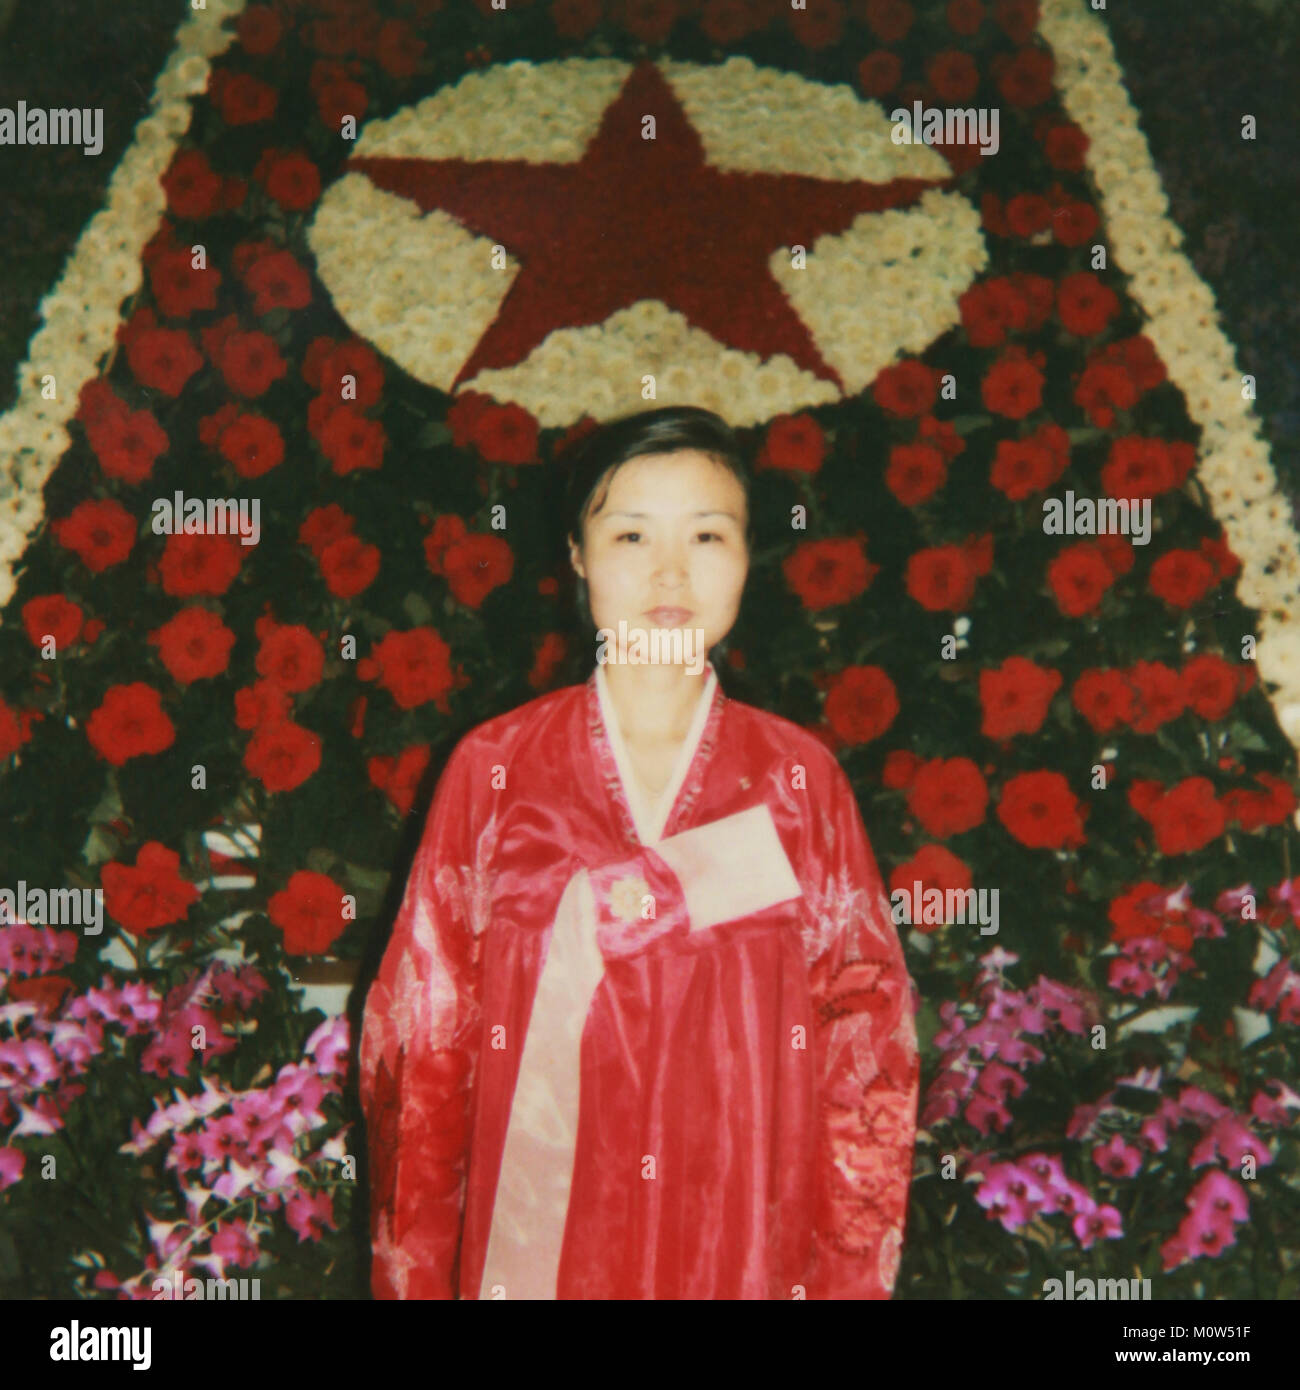 Polaroid of a woman posing in front of a red star made of Kimjongilia flowers during the international Kimilsungia and Kimjongilia festival, Pyongan Province, Pyongyang, North Korea Stock Photo